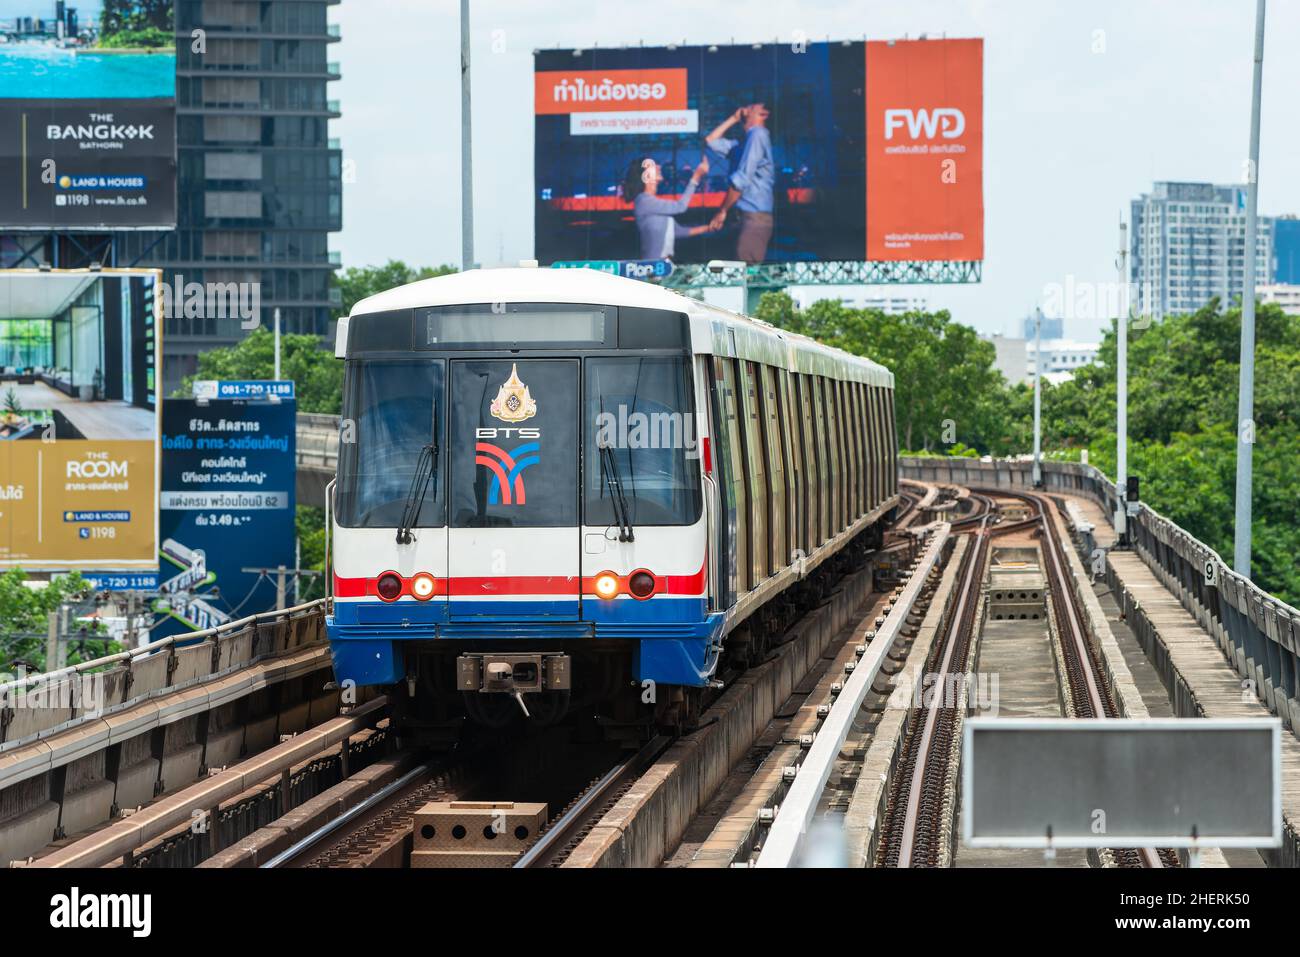 BTS Skytrain arriving at Saphan Taksin station in Bangkok. Large advertising boards in the background. Stock Photo